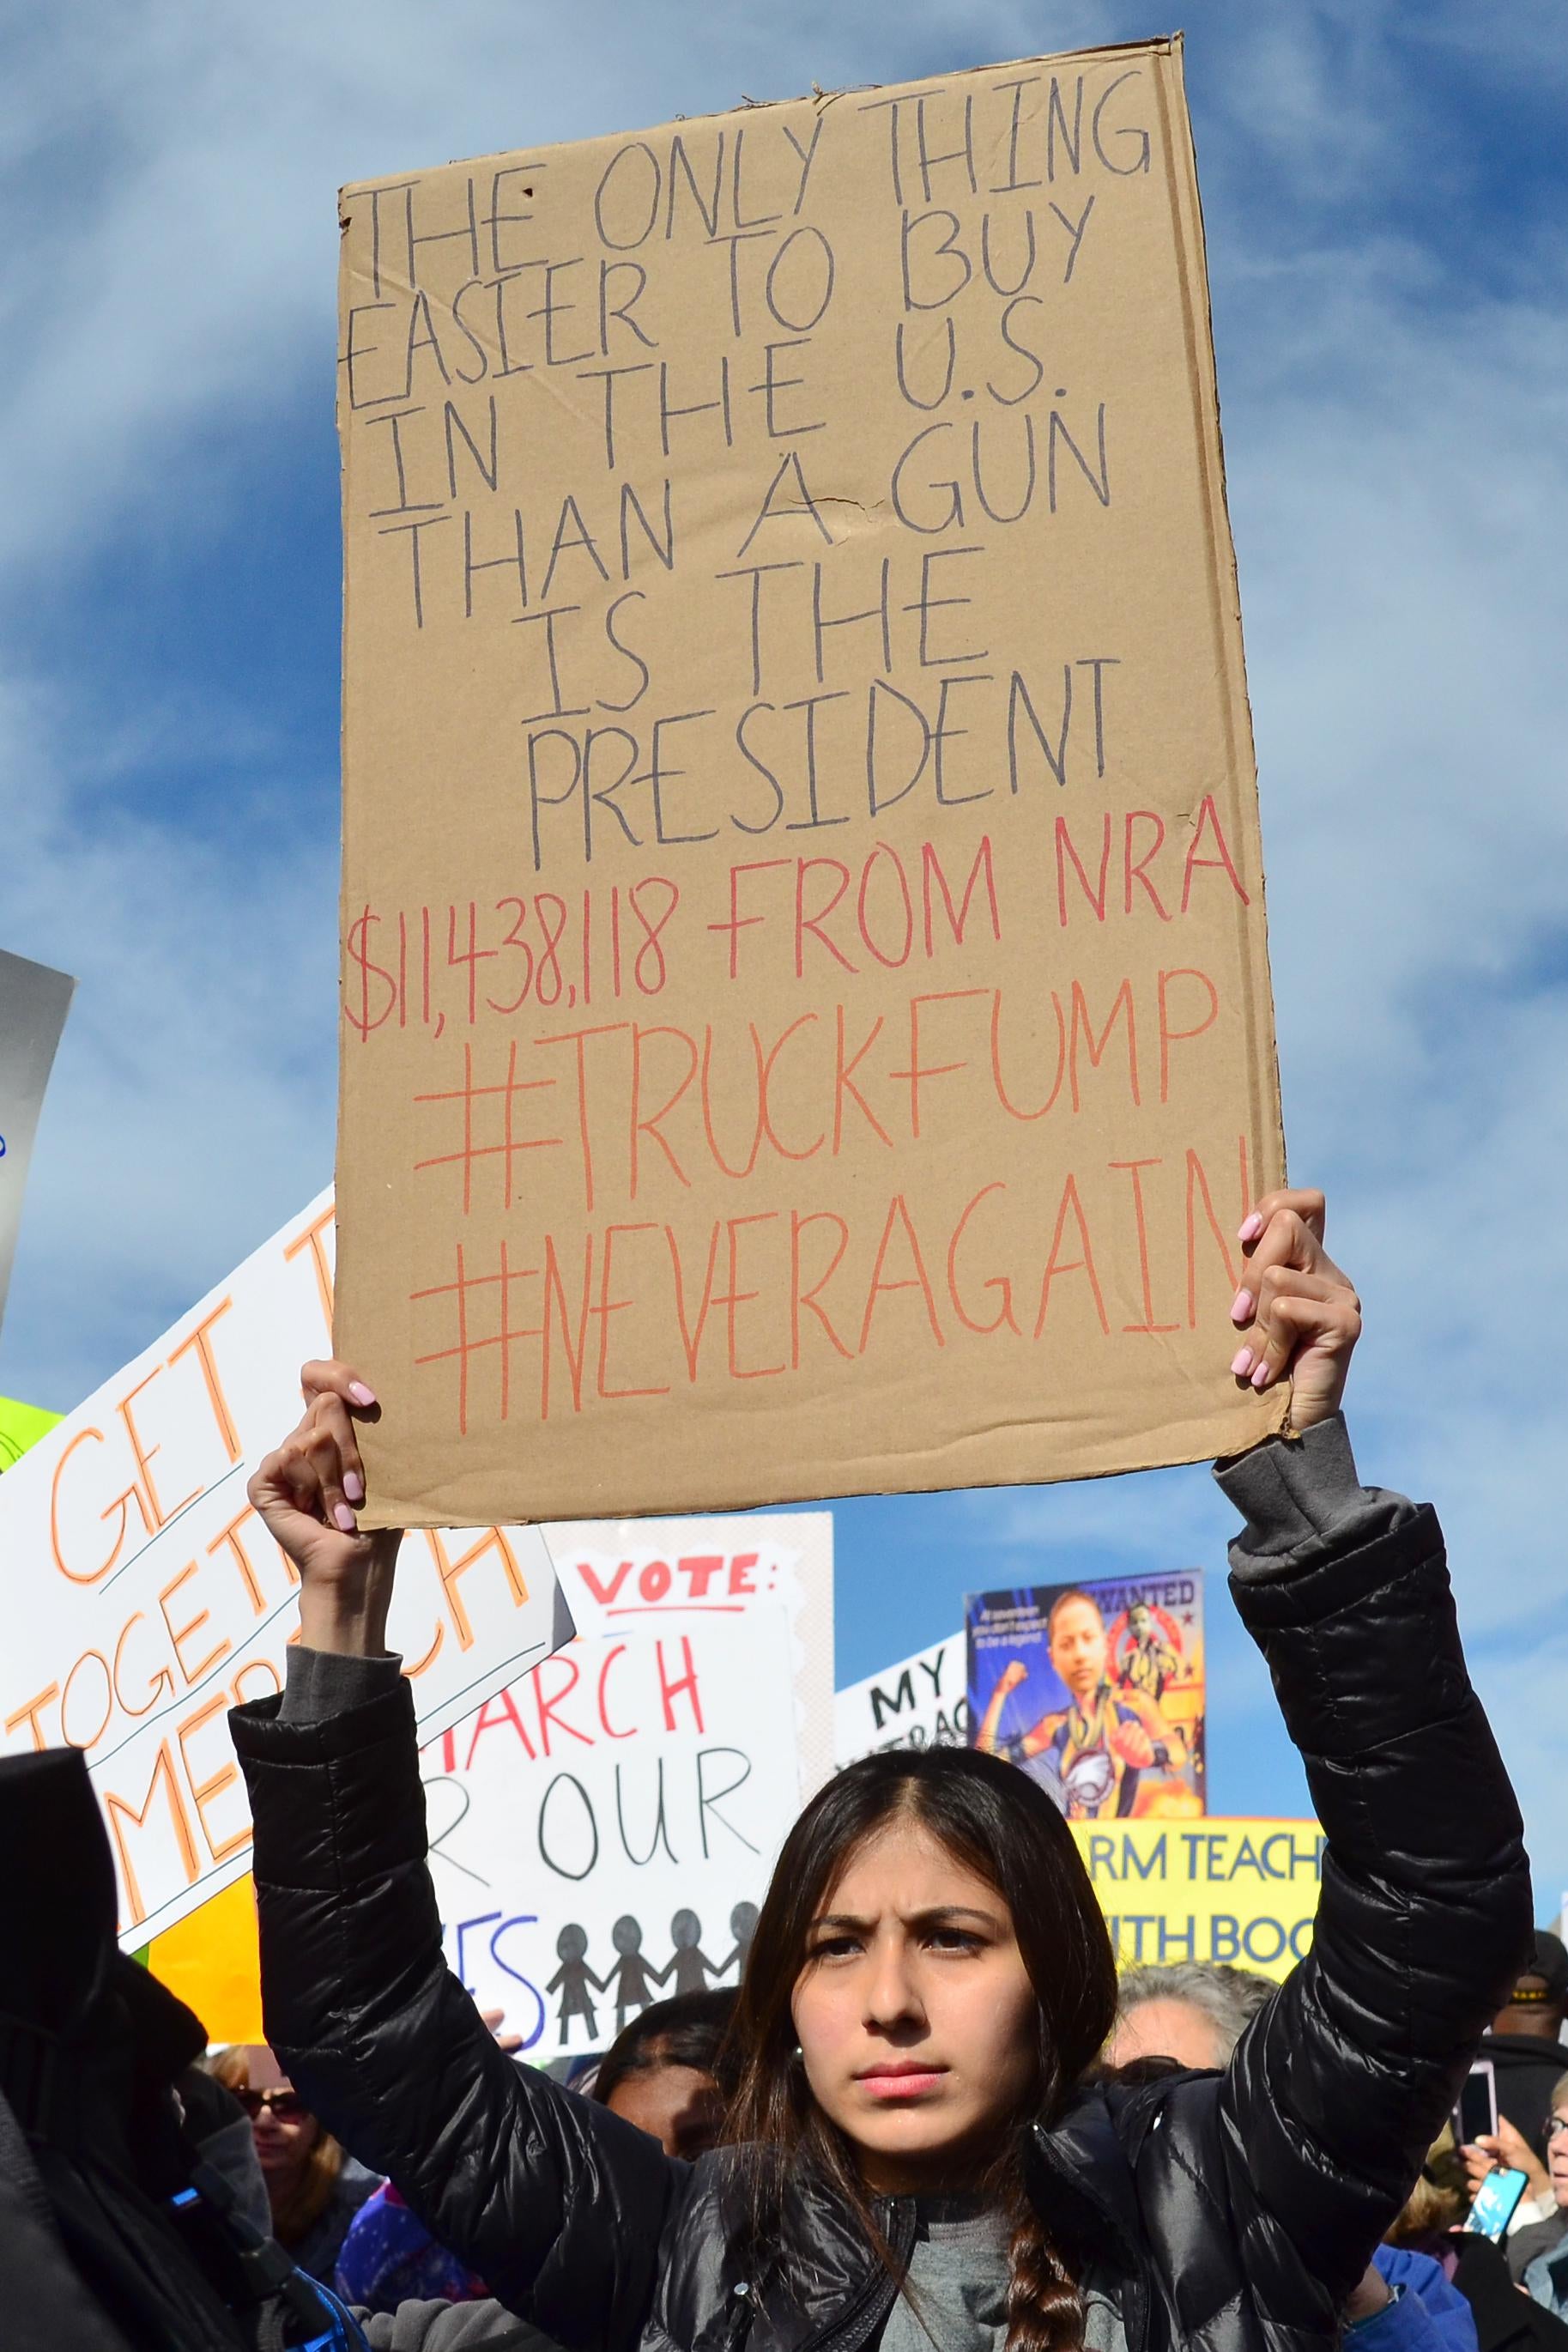 A woman hoists a poster reading, "The only thing easier to buy in the U.S. than a gun is the president."